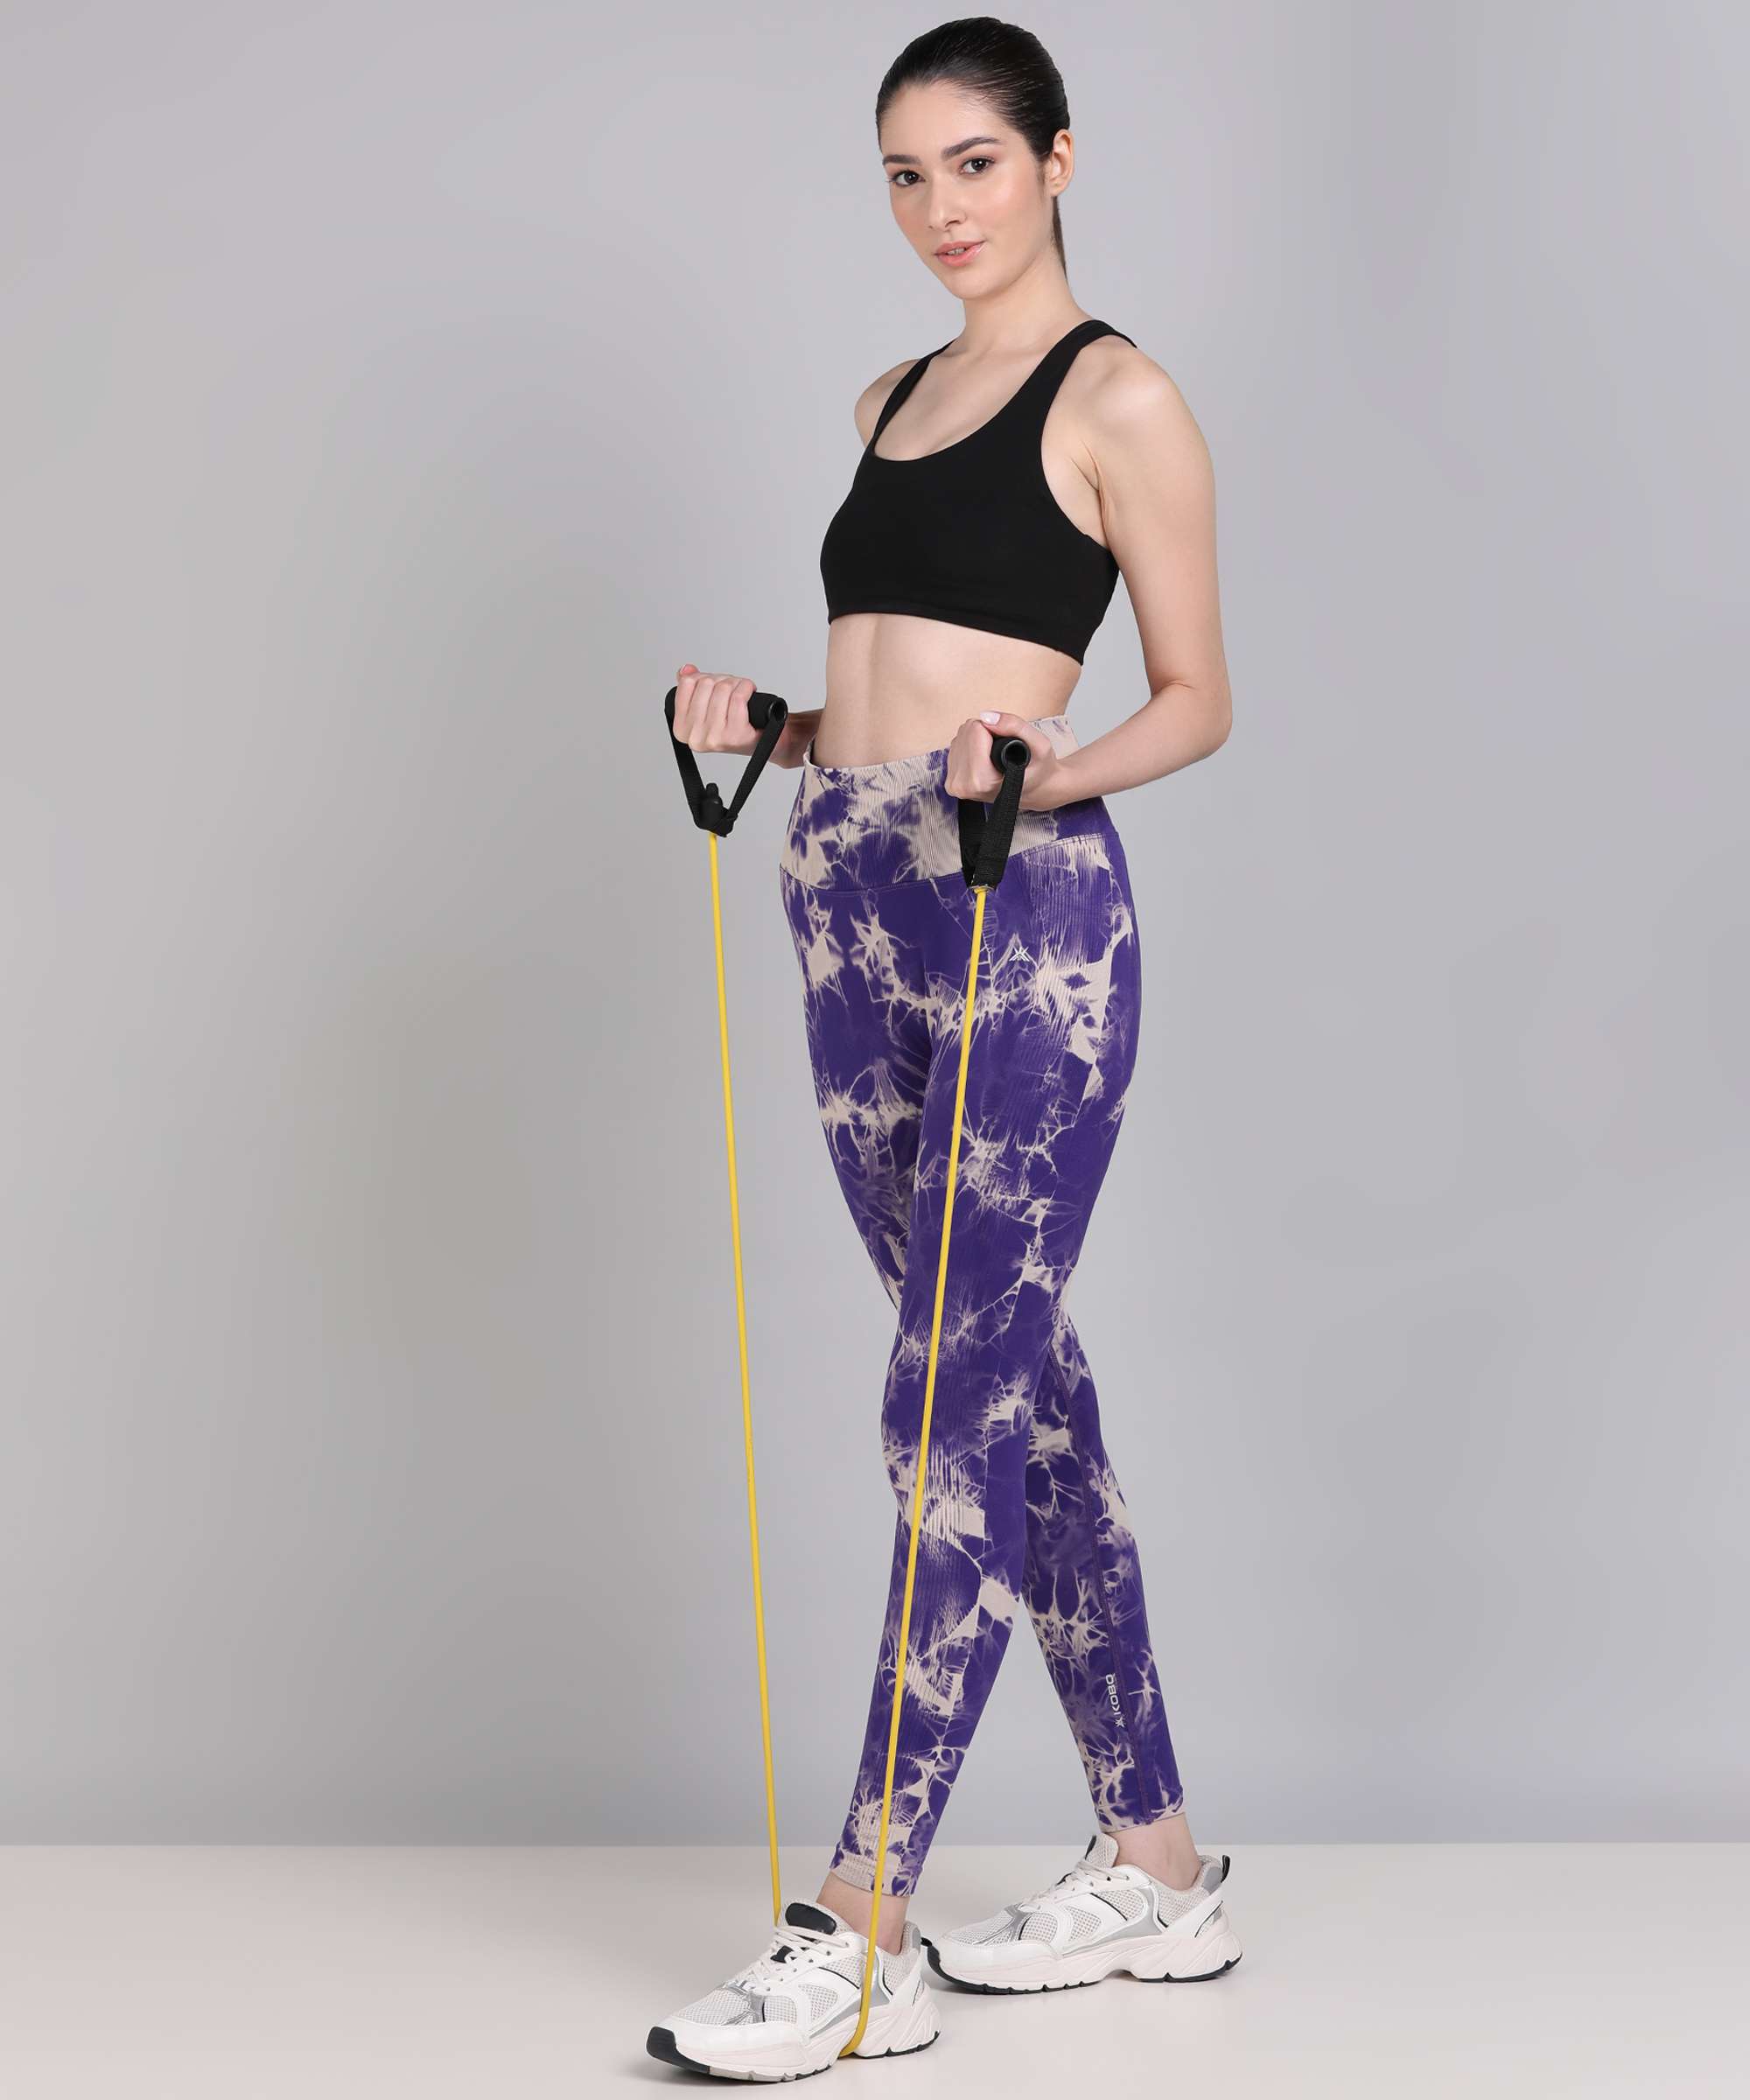 Seamless Squat Proof Leggings - KOBO SPORTS Exclusively Designed for Sports